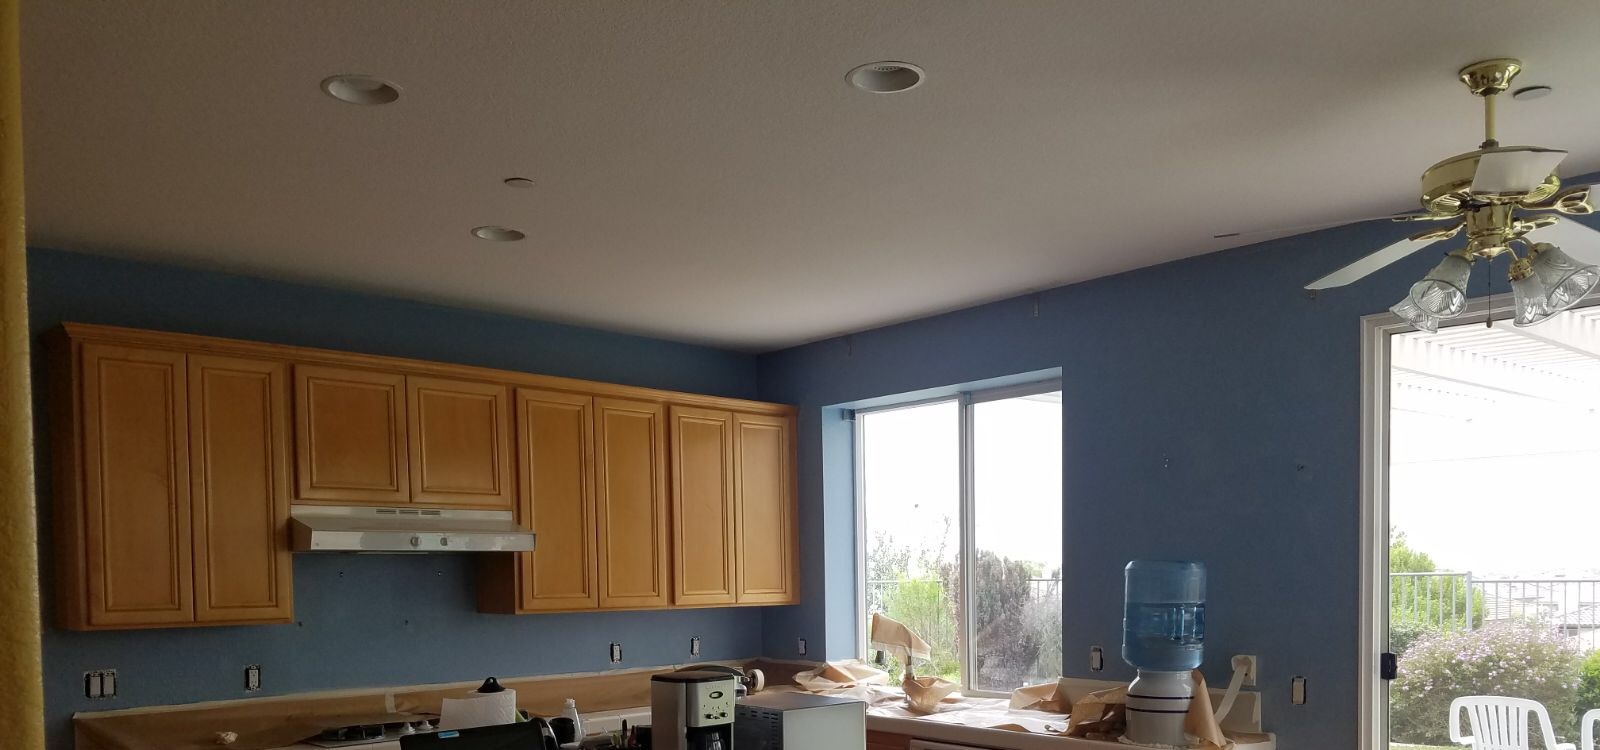 CertaPro Painters in 4S Ranch, CA your Interior kitchen painting experts